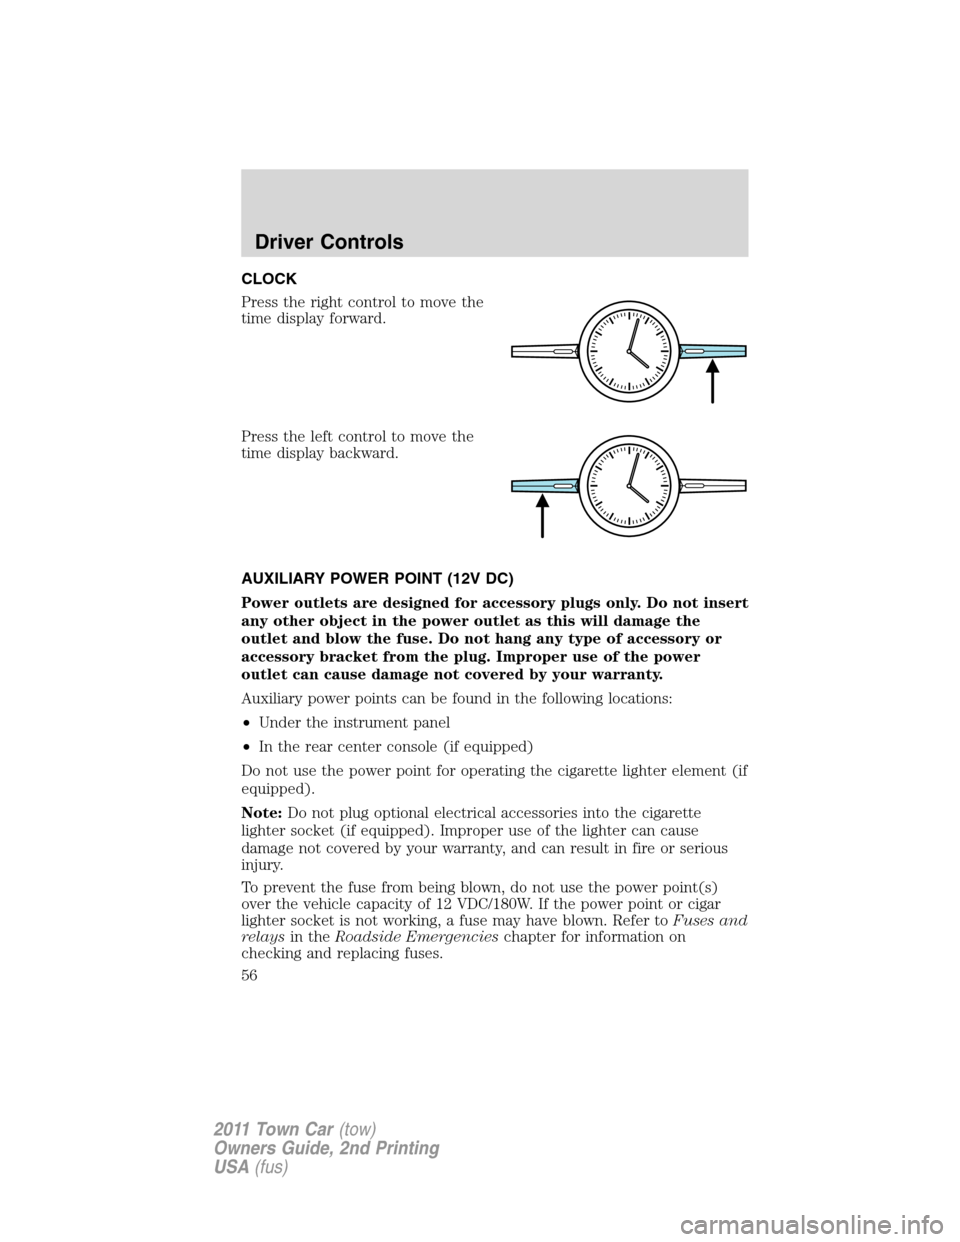 LINCOLN TOWN CAR 2011  Owners Manual CLOCK
Press the right control to move the
time display forward.
Press the left control to move the
time display backward.
AUXILIARY POWER POINT (12V DC)
Power outlets are designed for accessory plugs 